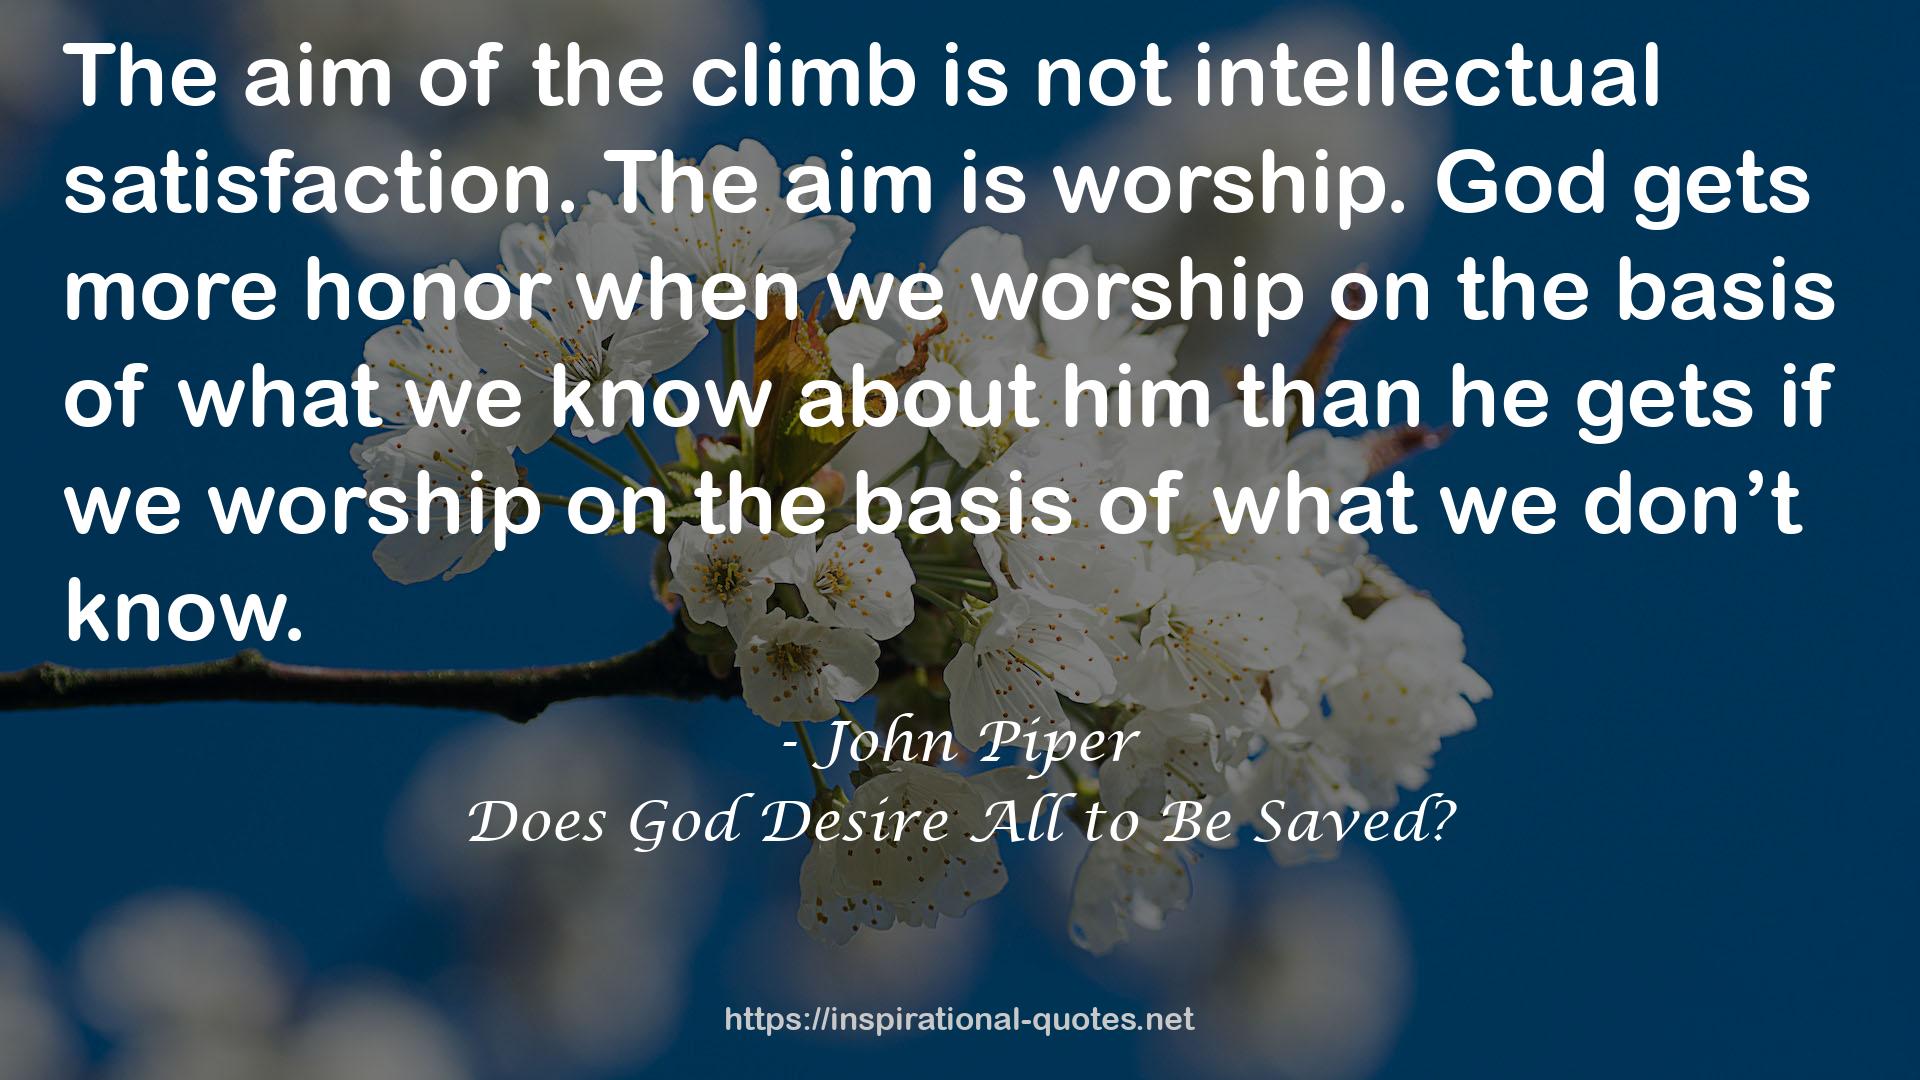 Does God Desire All to Be Saved? QUOTES